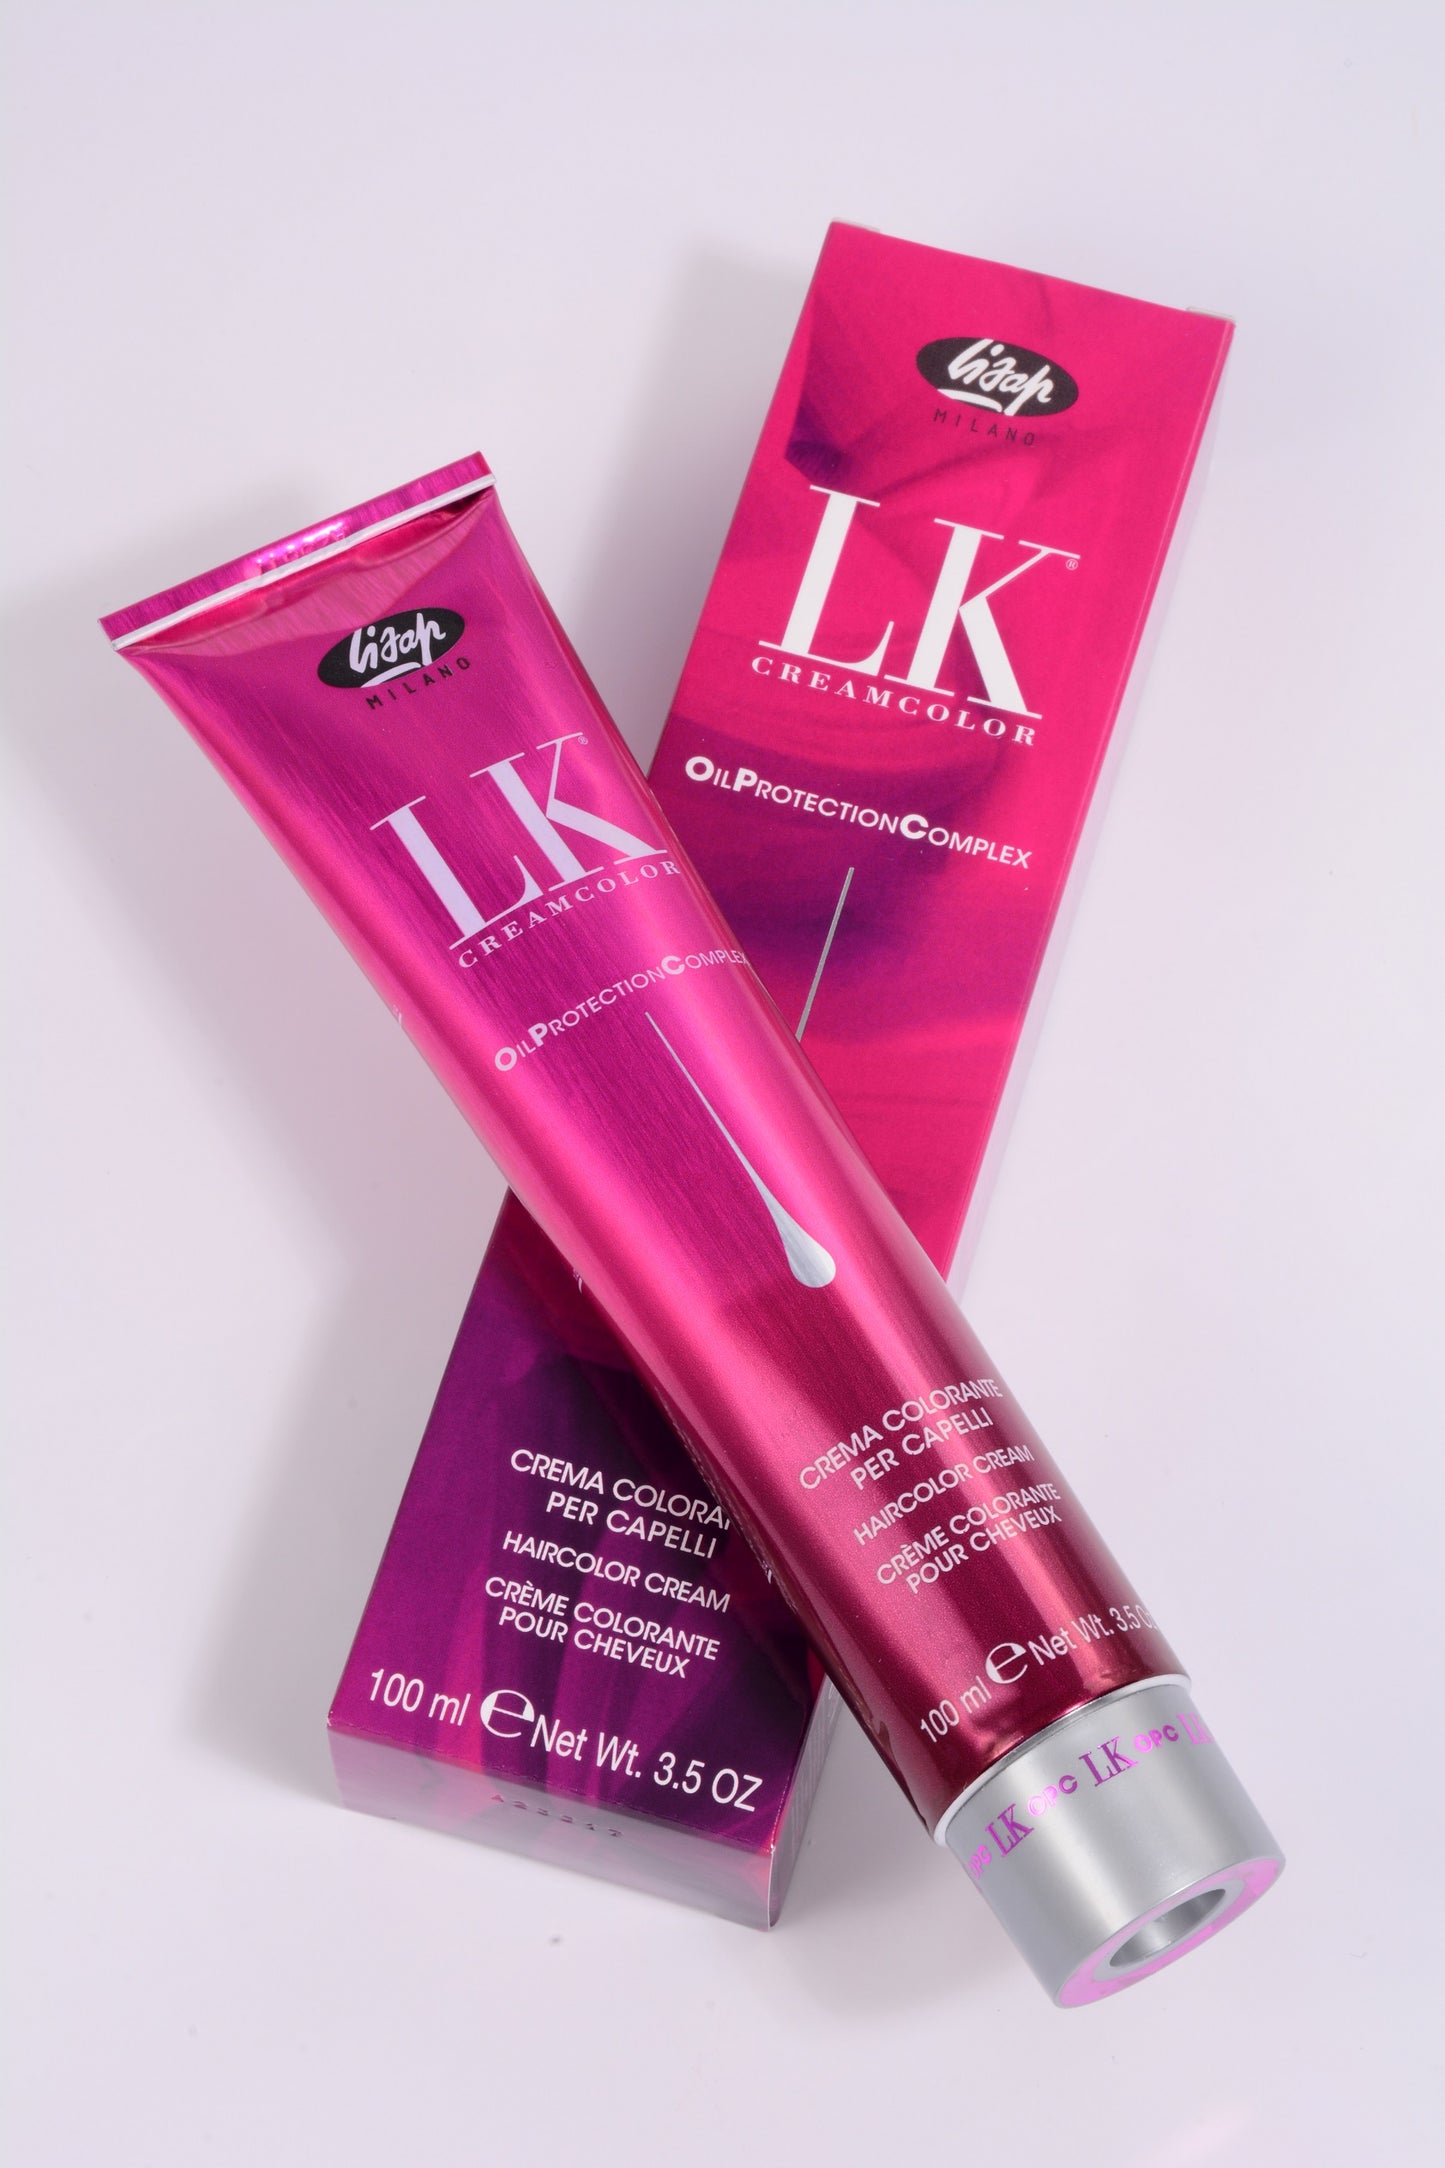 LK Creamcolor 4/24 Oil Protection Complex